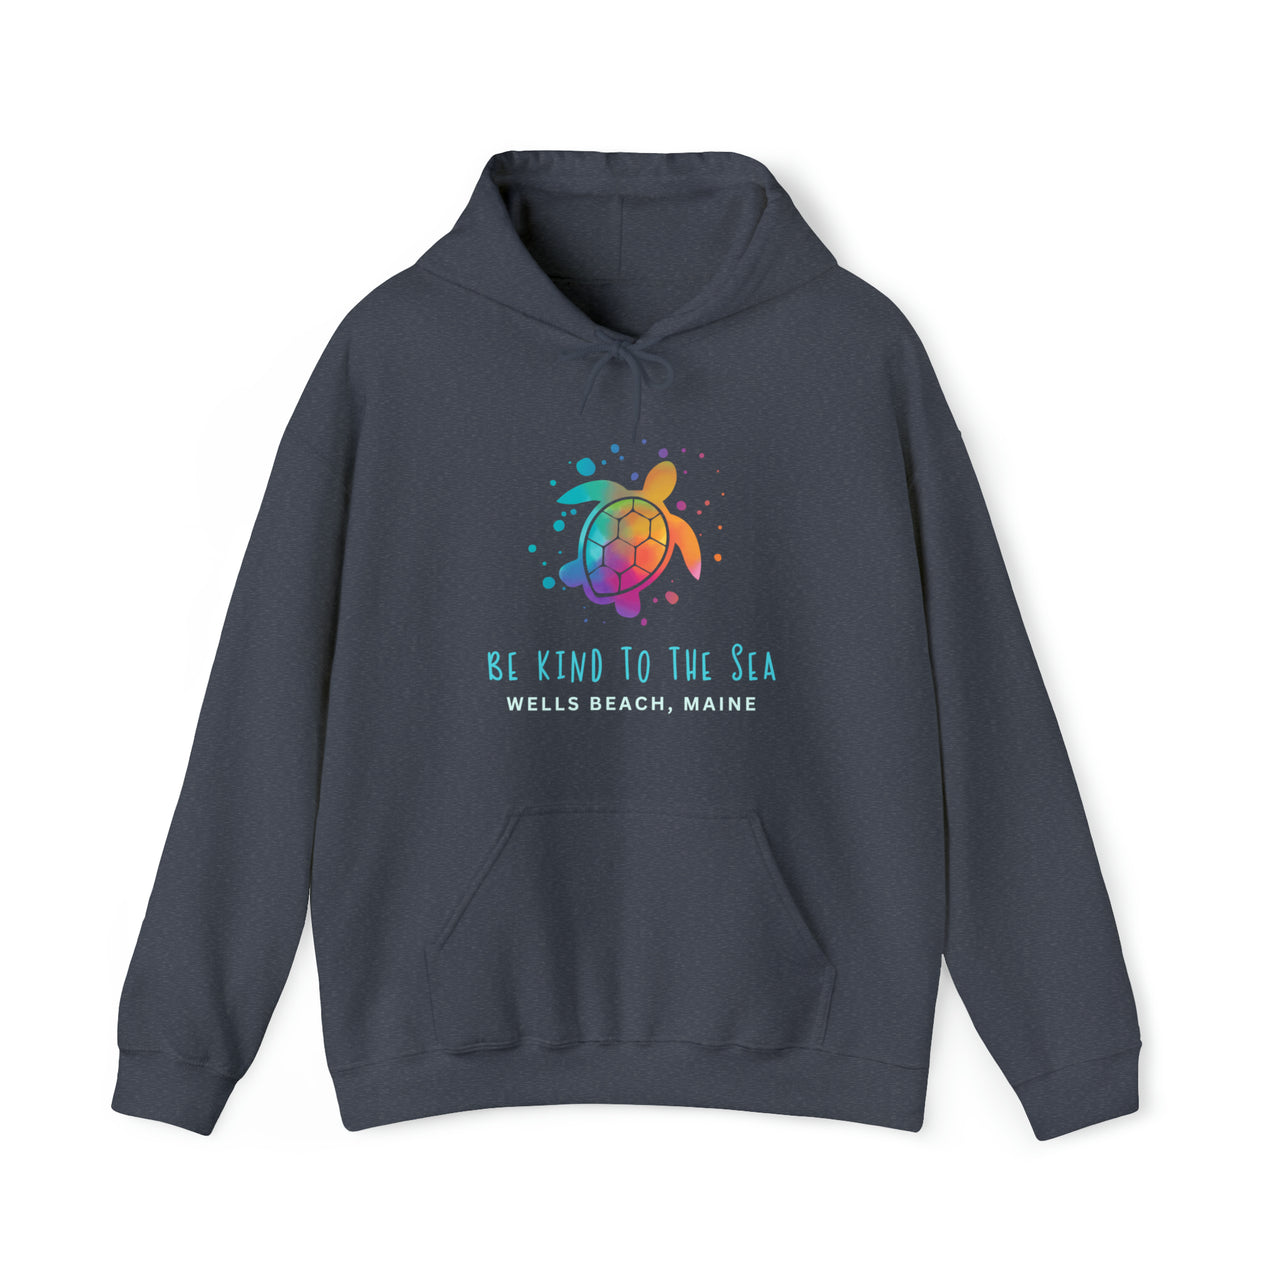 Be Kind to the Sea Heavy Blend Hooded Sweatshirt, Personalized, Heather Navy